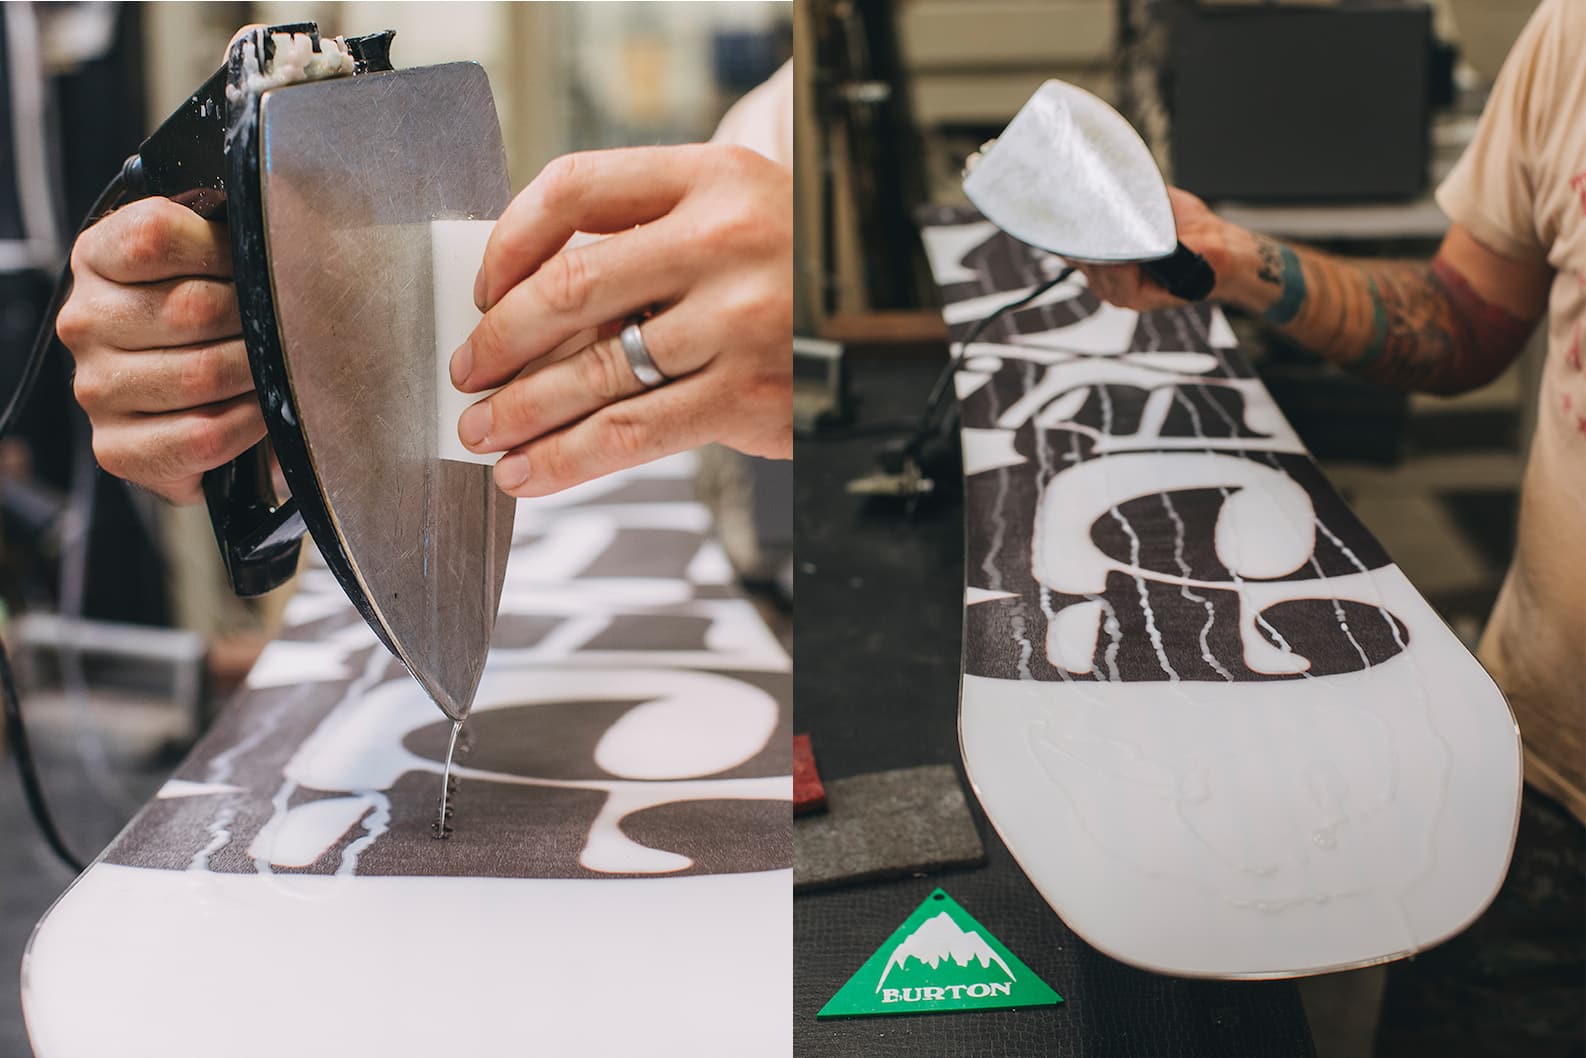 How to Wax a Snowboard: 6 Quick & Easy Steps